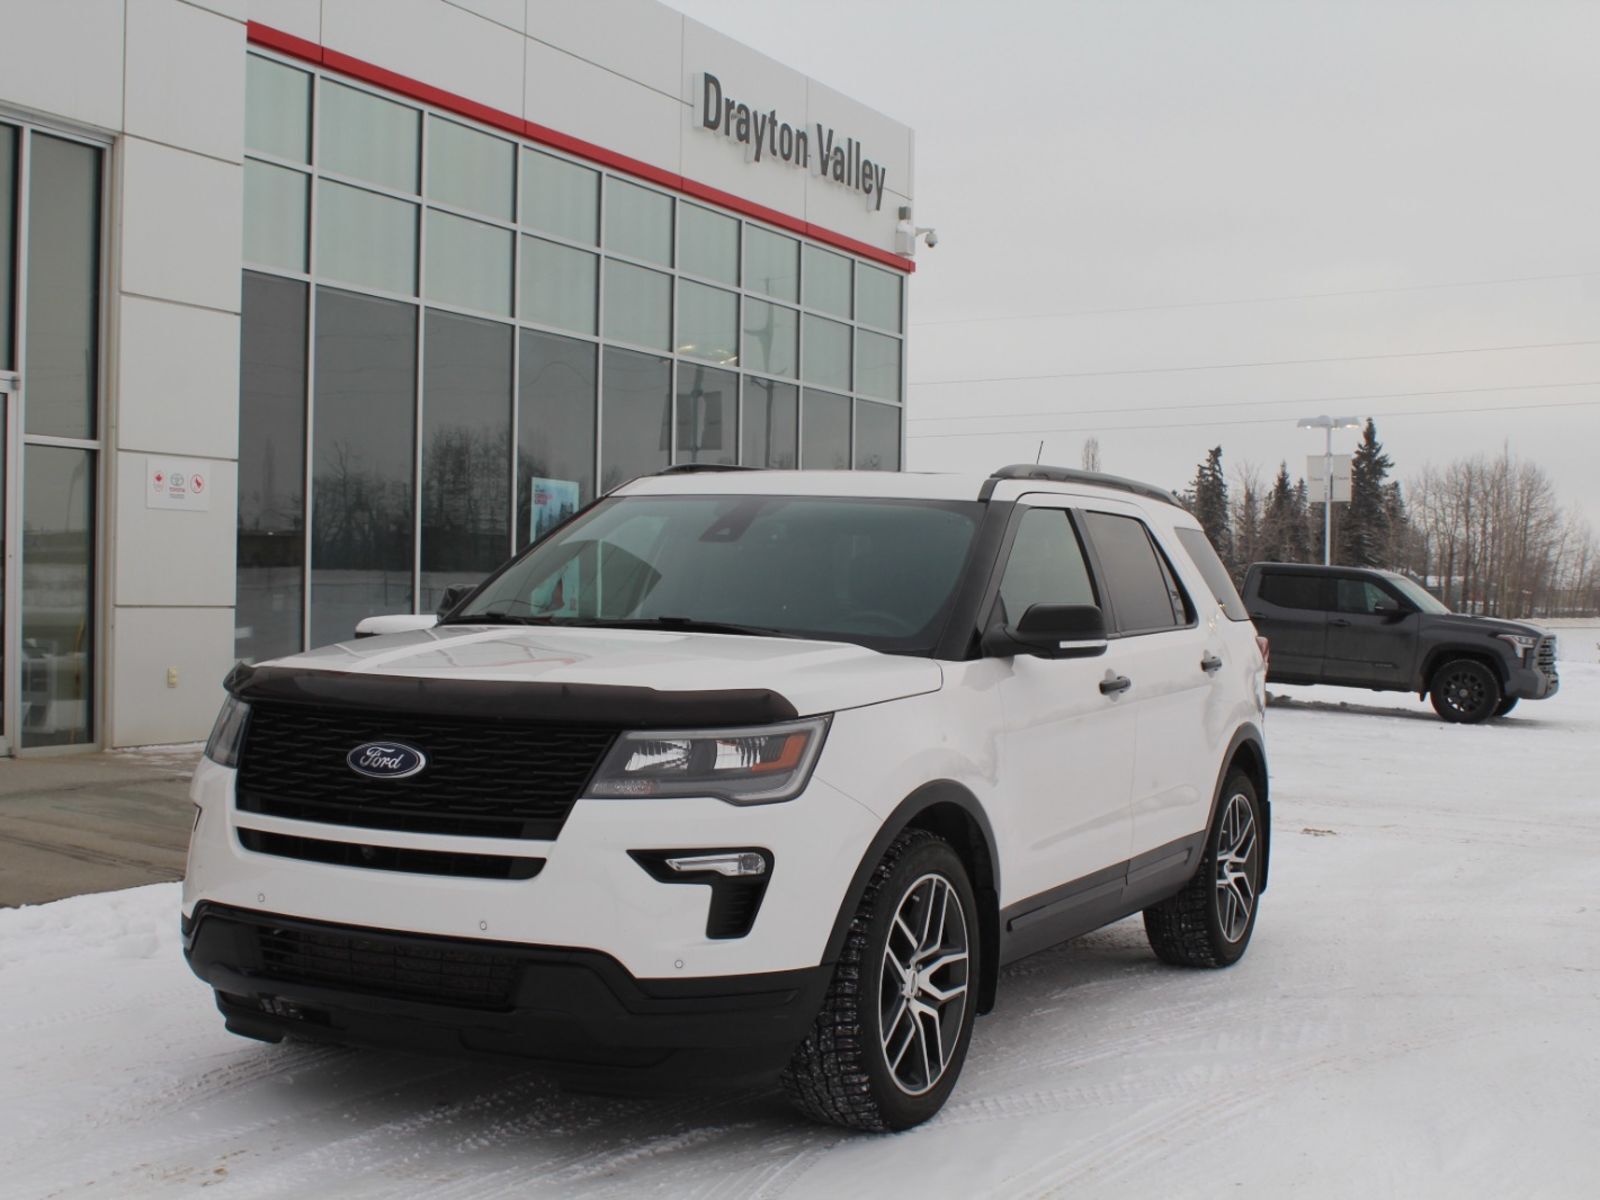 2019 Ford Explorer Sport, leather, sunroof